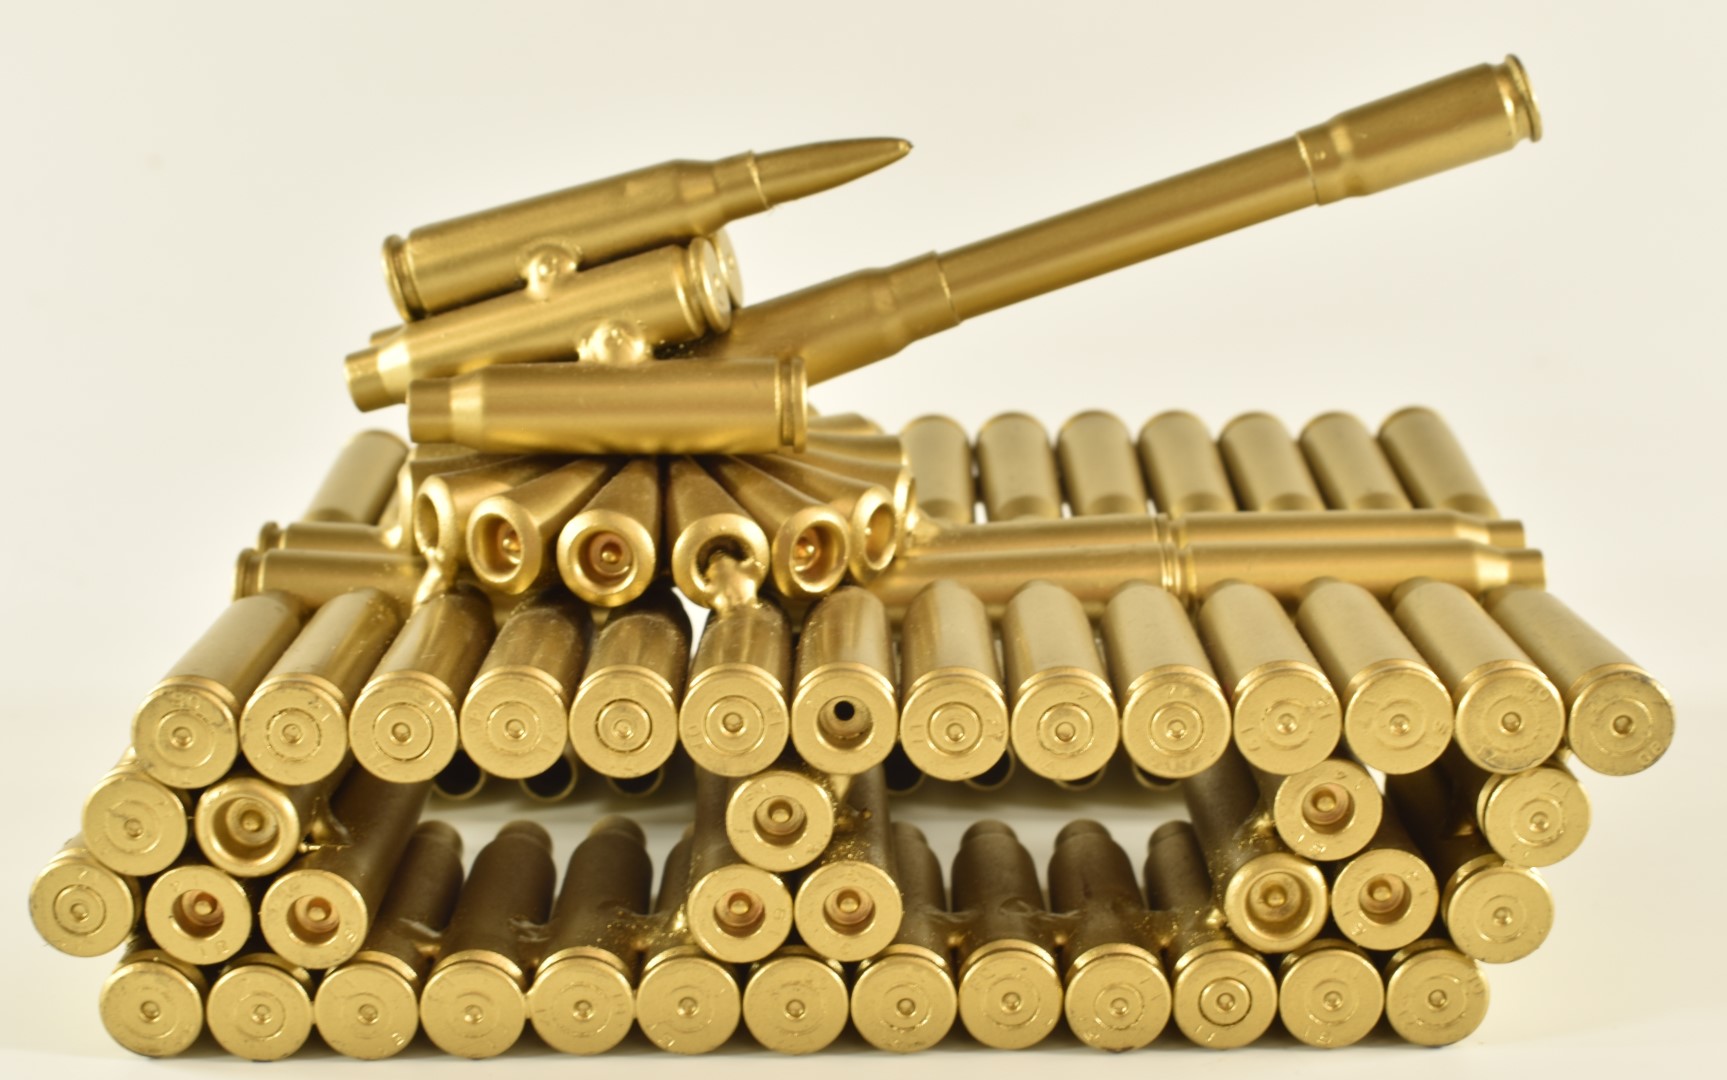 Novelty trench art type model of a tank formed from bullet cases, length 16cm - Image 2 of 5